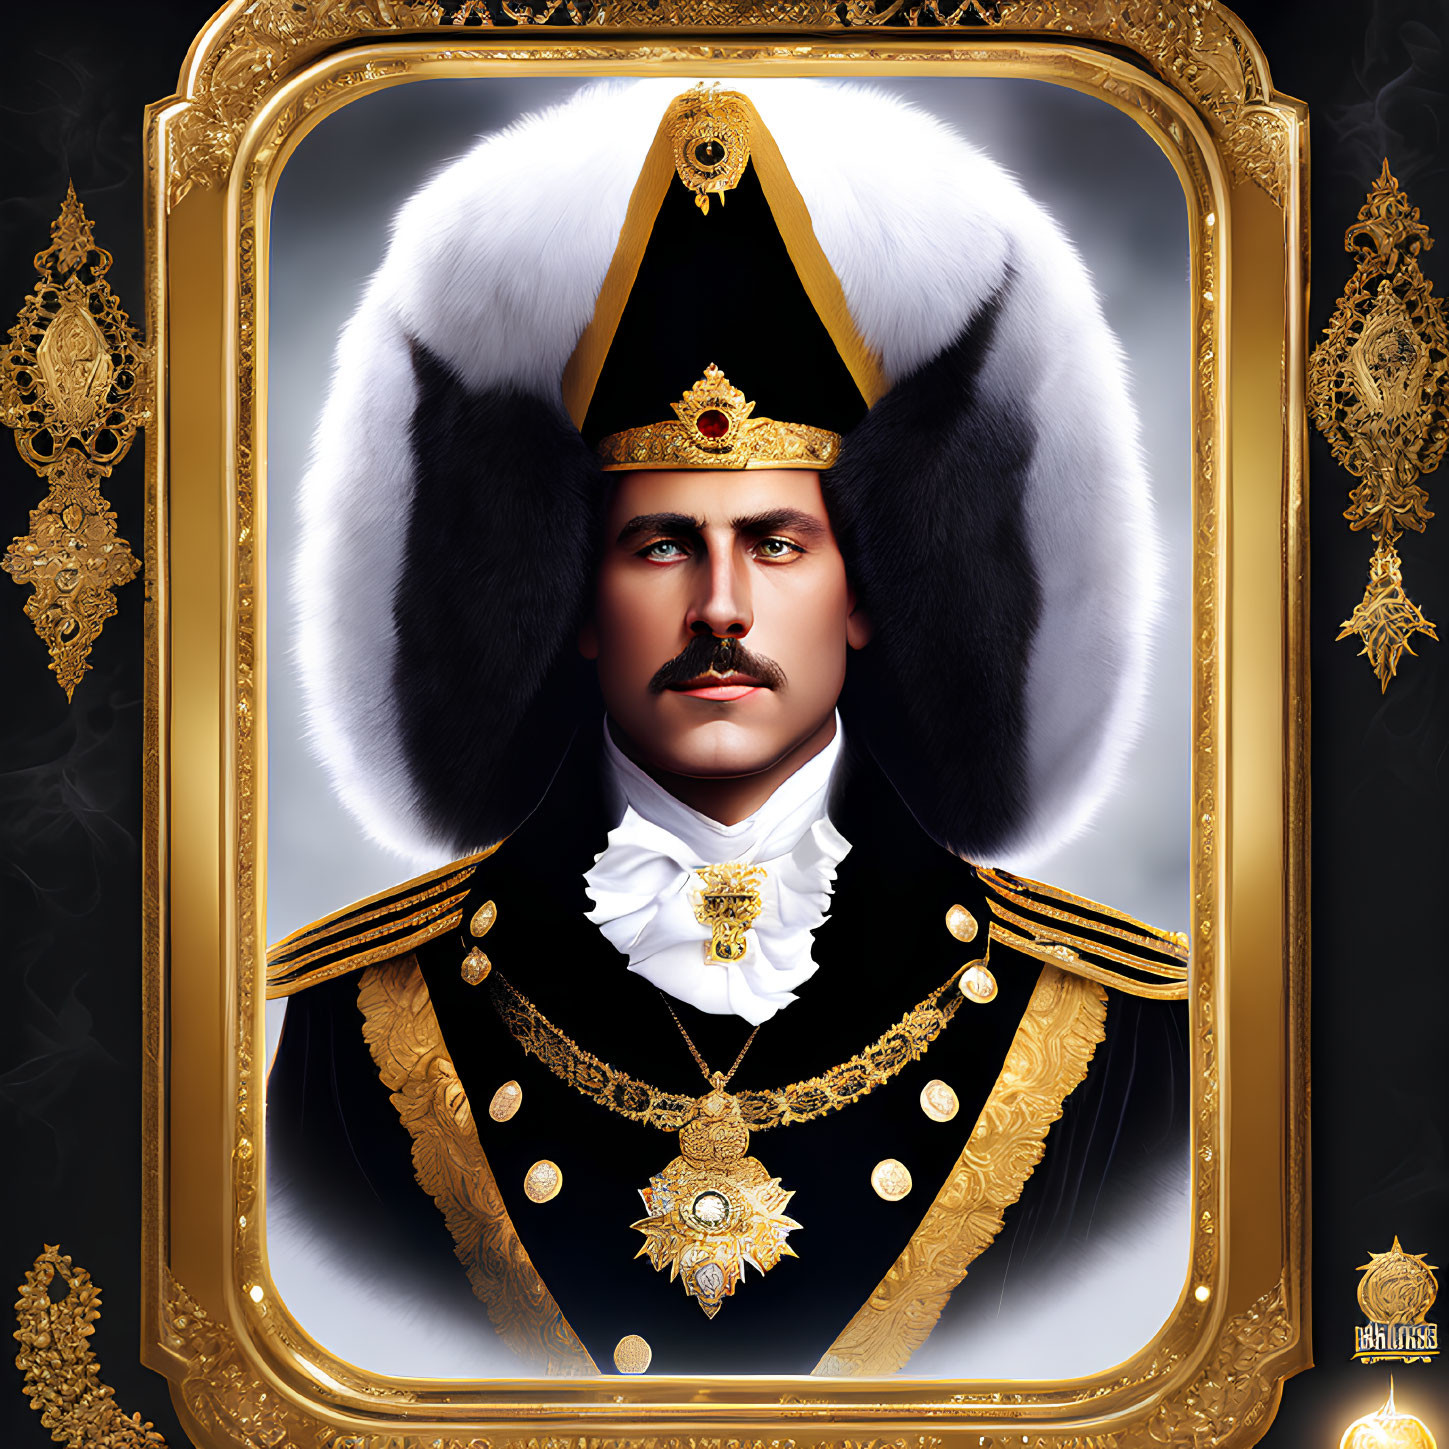 Regal portrait of a man in ornate military uniform with fur hat and golden frame